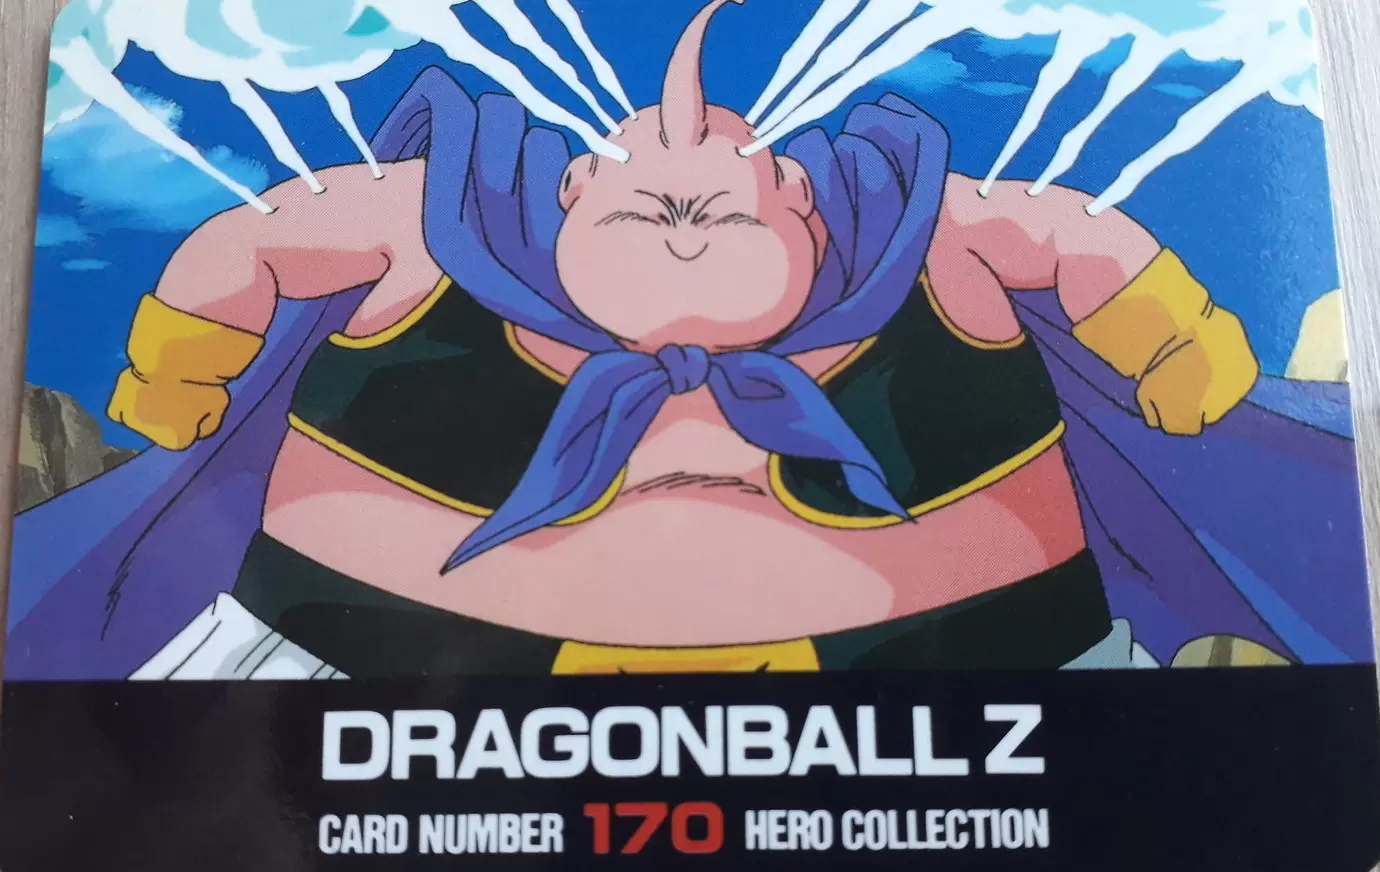 Dragon Ball Z Hero Collection Series Part 2 - Card number 170